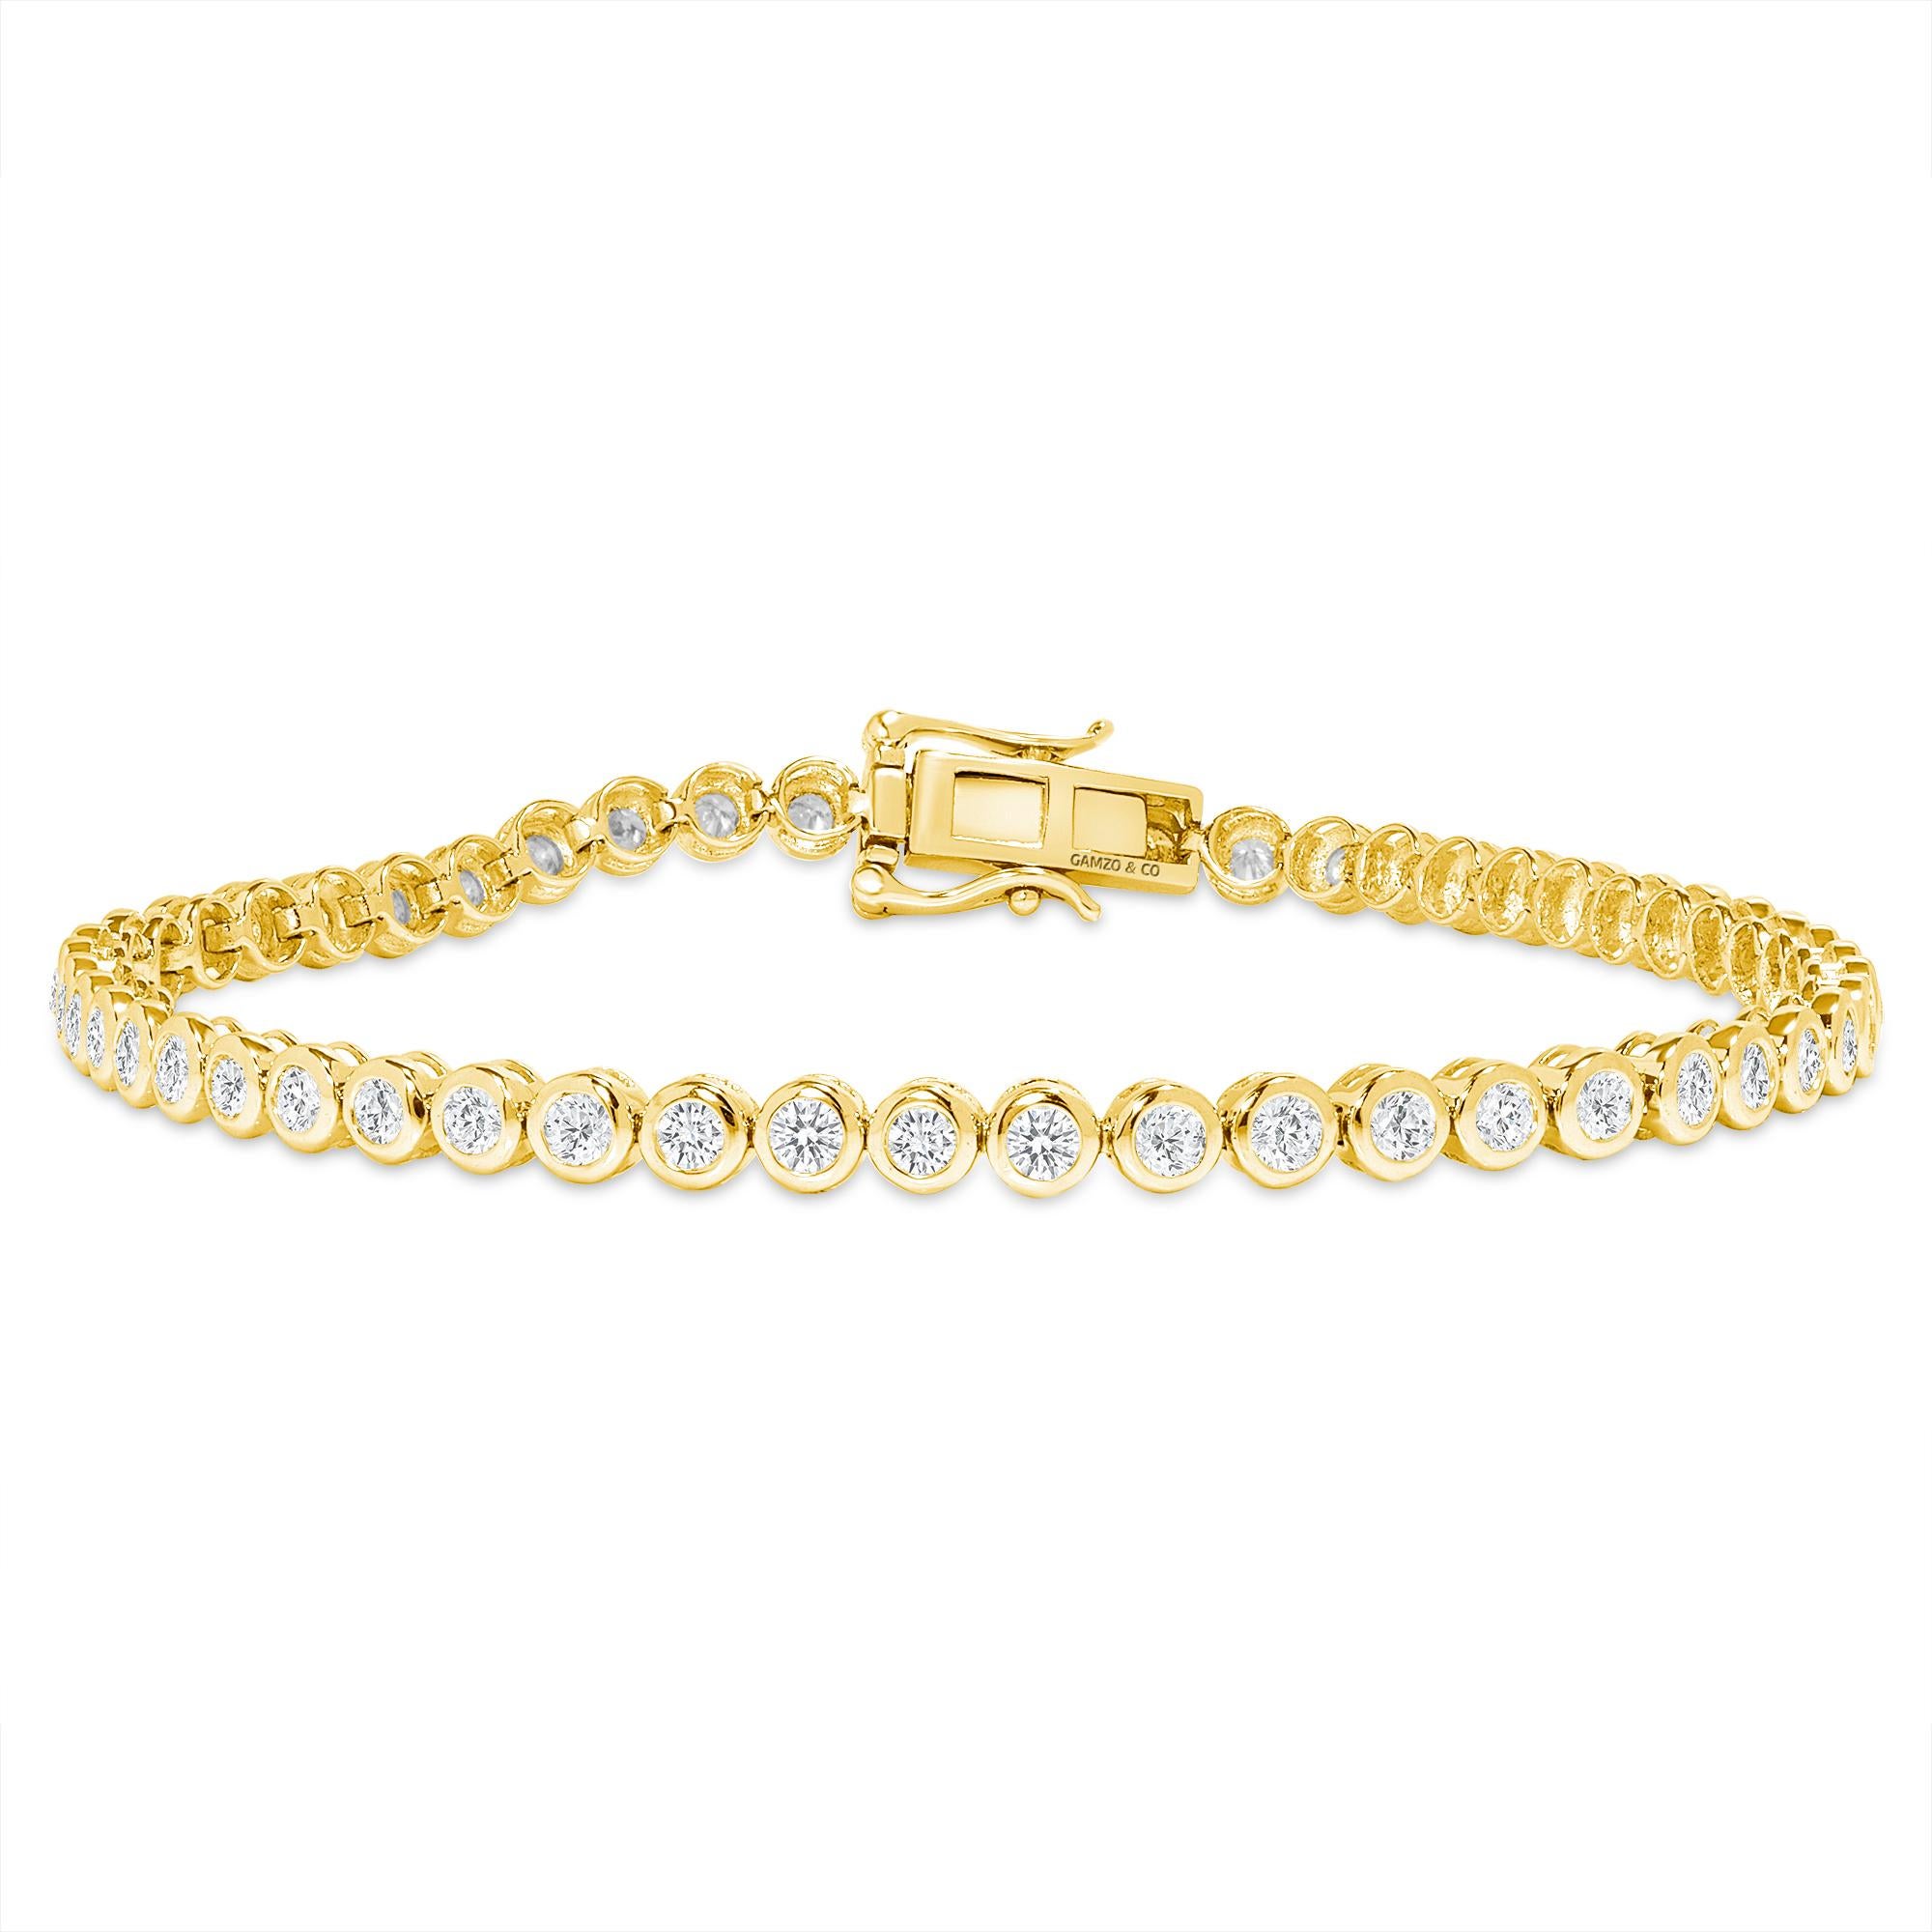 These beautiful round diamonds dance around your wrist as they absorb light and attention.
Metal: 14k Gold
Diamond Cut: Round
Diamond Total Carats: 3ct
Diamond Clarity: VS
Diamond Color: F
Color: Yellow Gold
Bracelet Length: 7.5 Inches 
Included